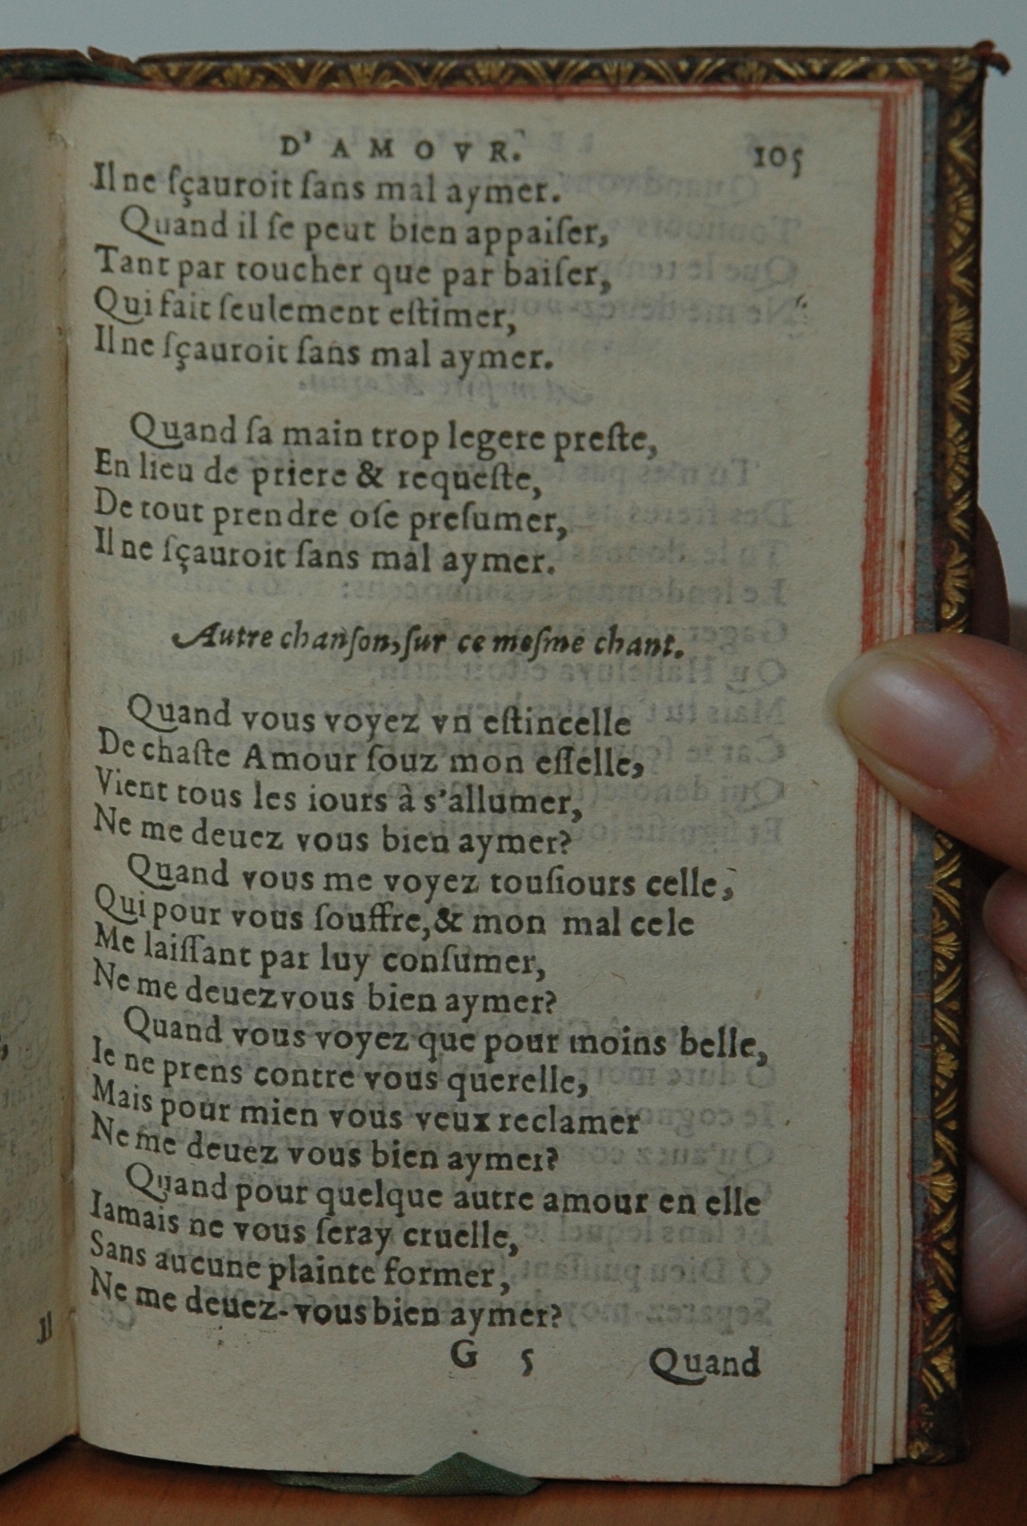 http://eman-archives.org/import/TJI/1582/[1582_Courtizanamoureux_Rigaud]_Page_105.jpg